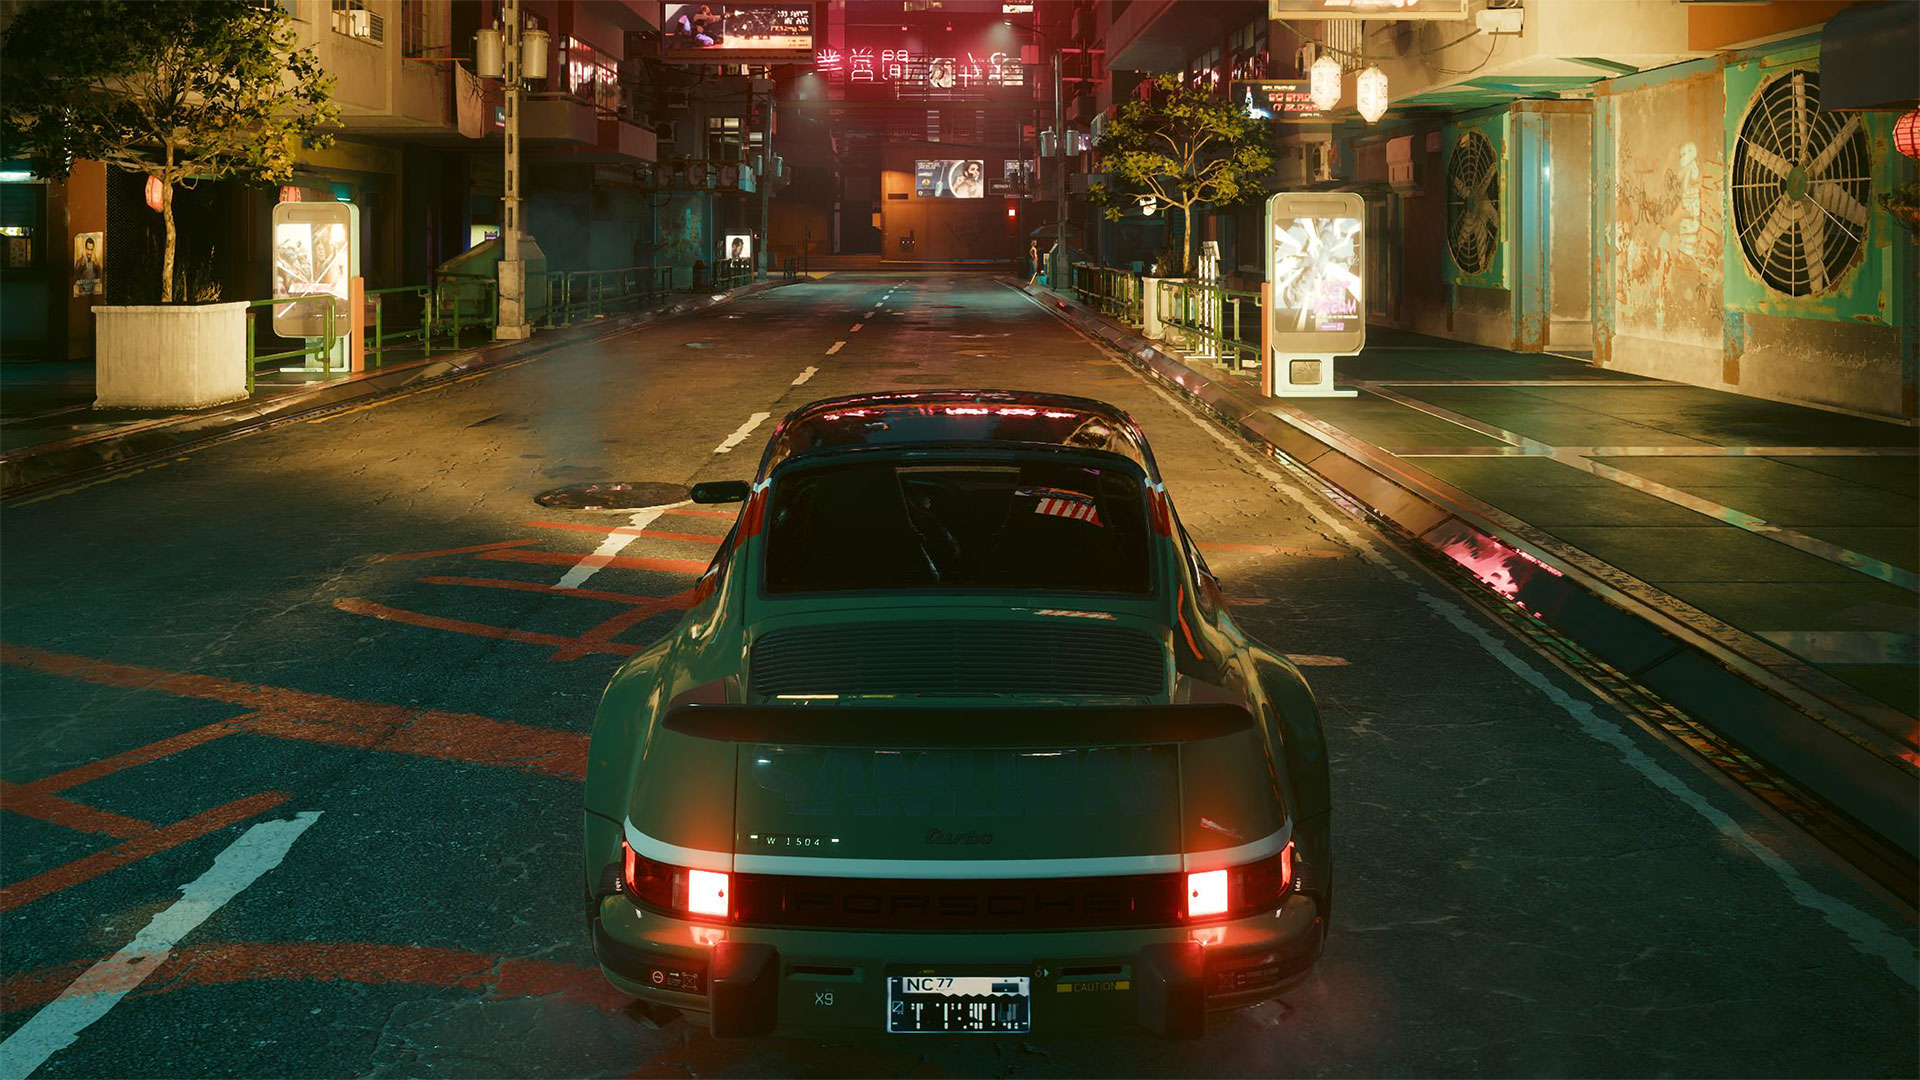 NVIDIA's DLSS 3.5 brings upgraded ray-tracing to Cyberpunk 2077 this week